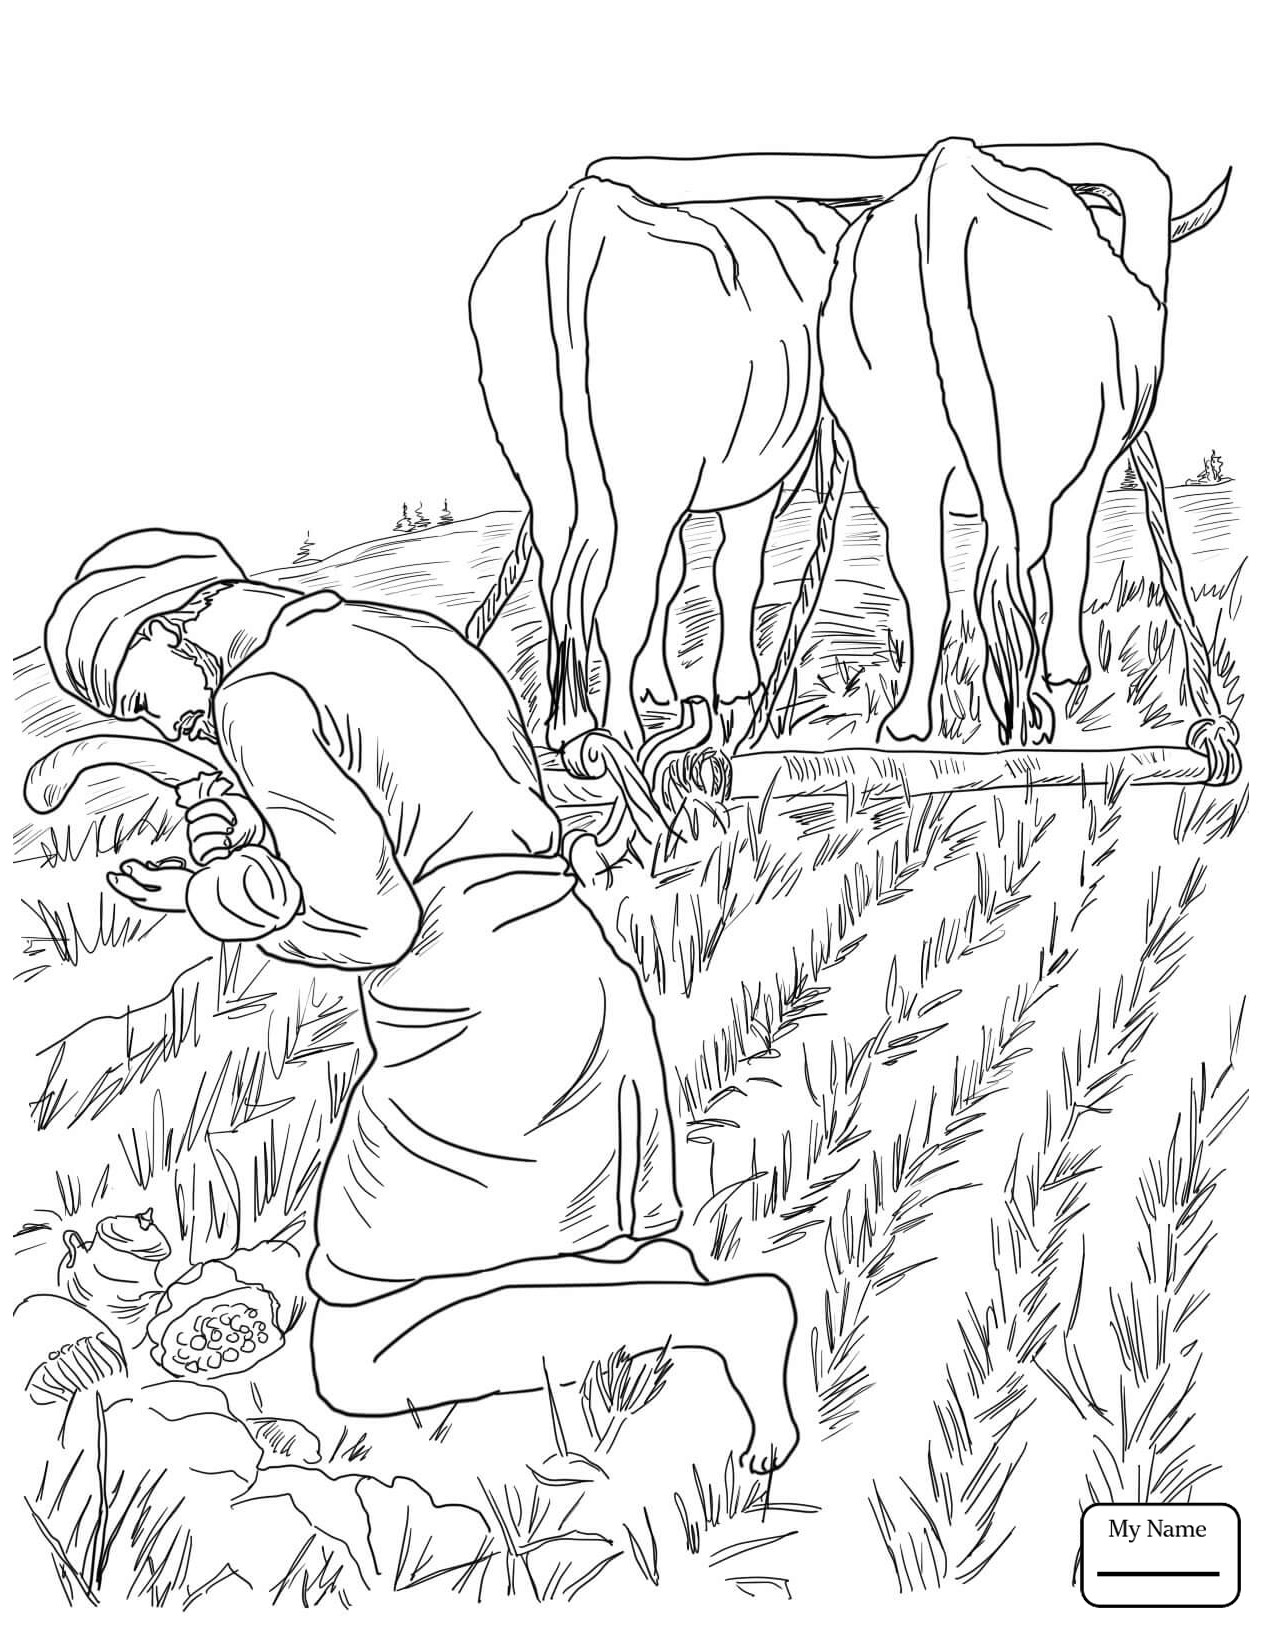 Parable Of The Sower Coloring Page at Free printable